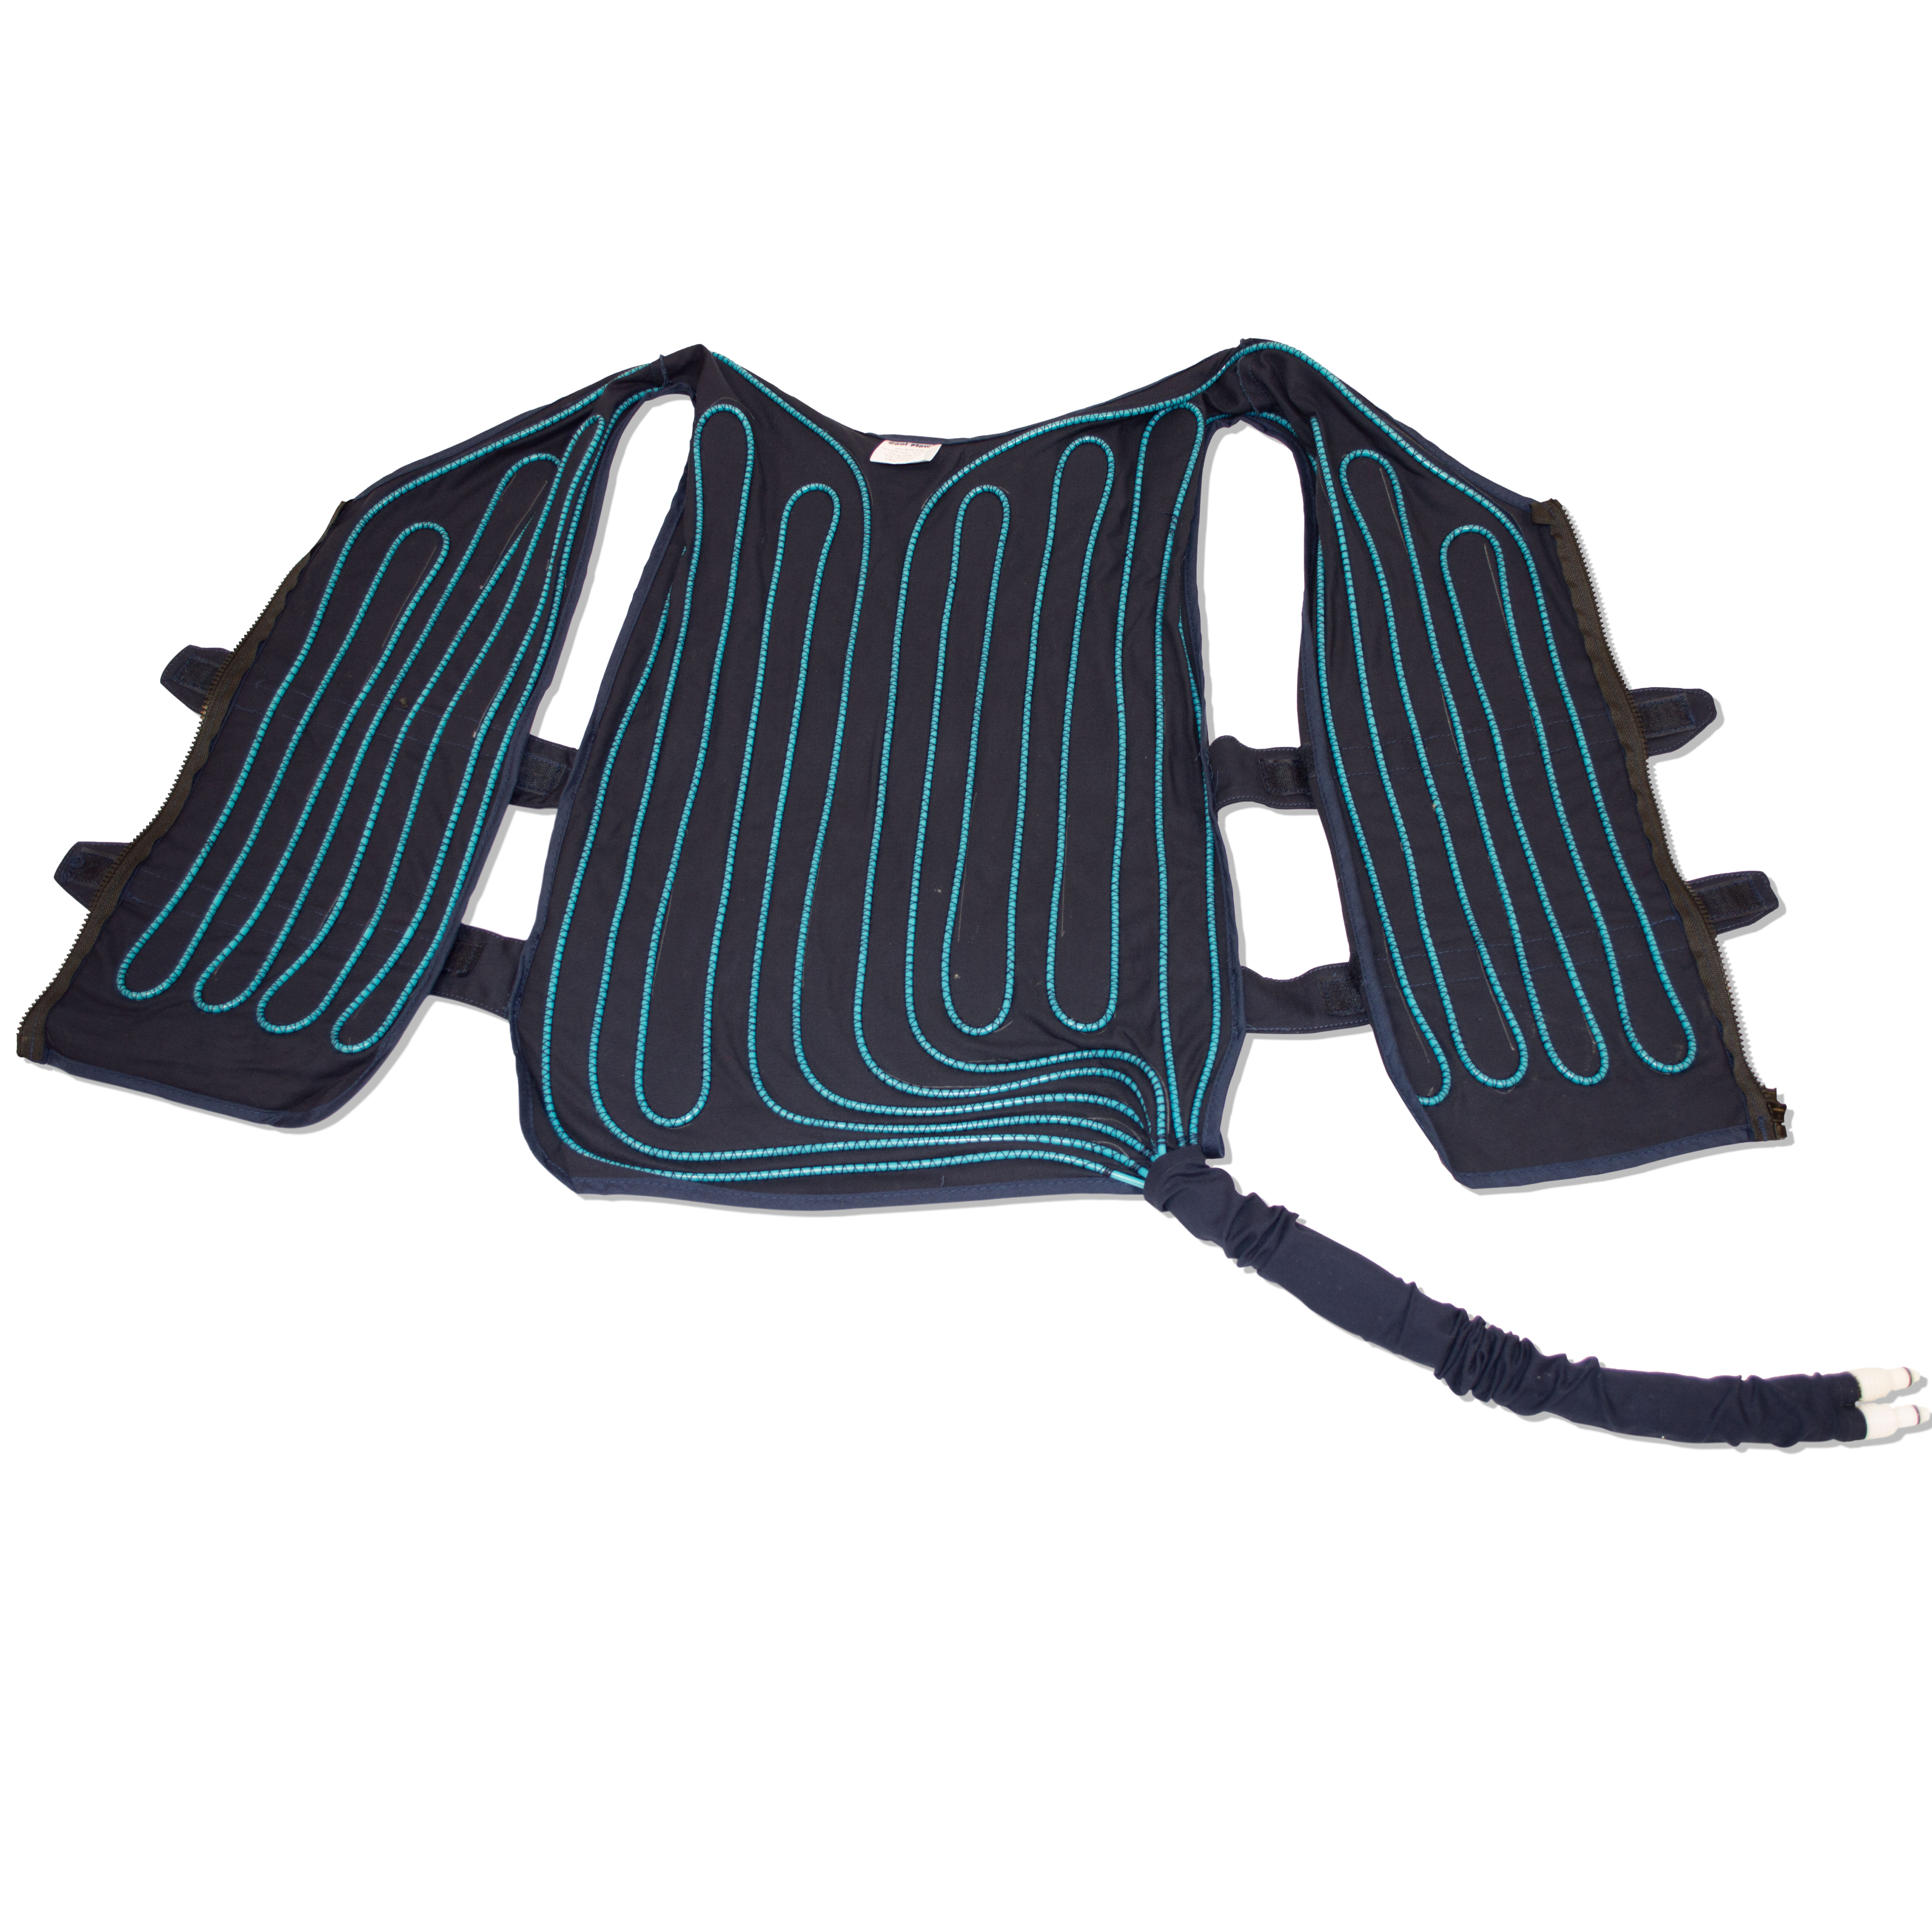 A blue vest opened up to expose water circulating tubing sewn in. A lightweight vest with adjustable straps at the chest and waist to ensure a snug fit.